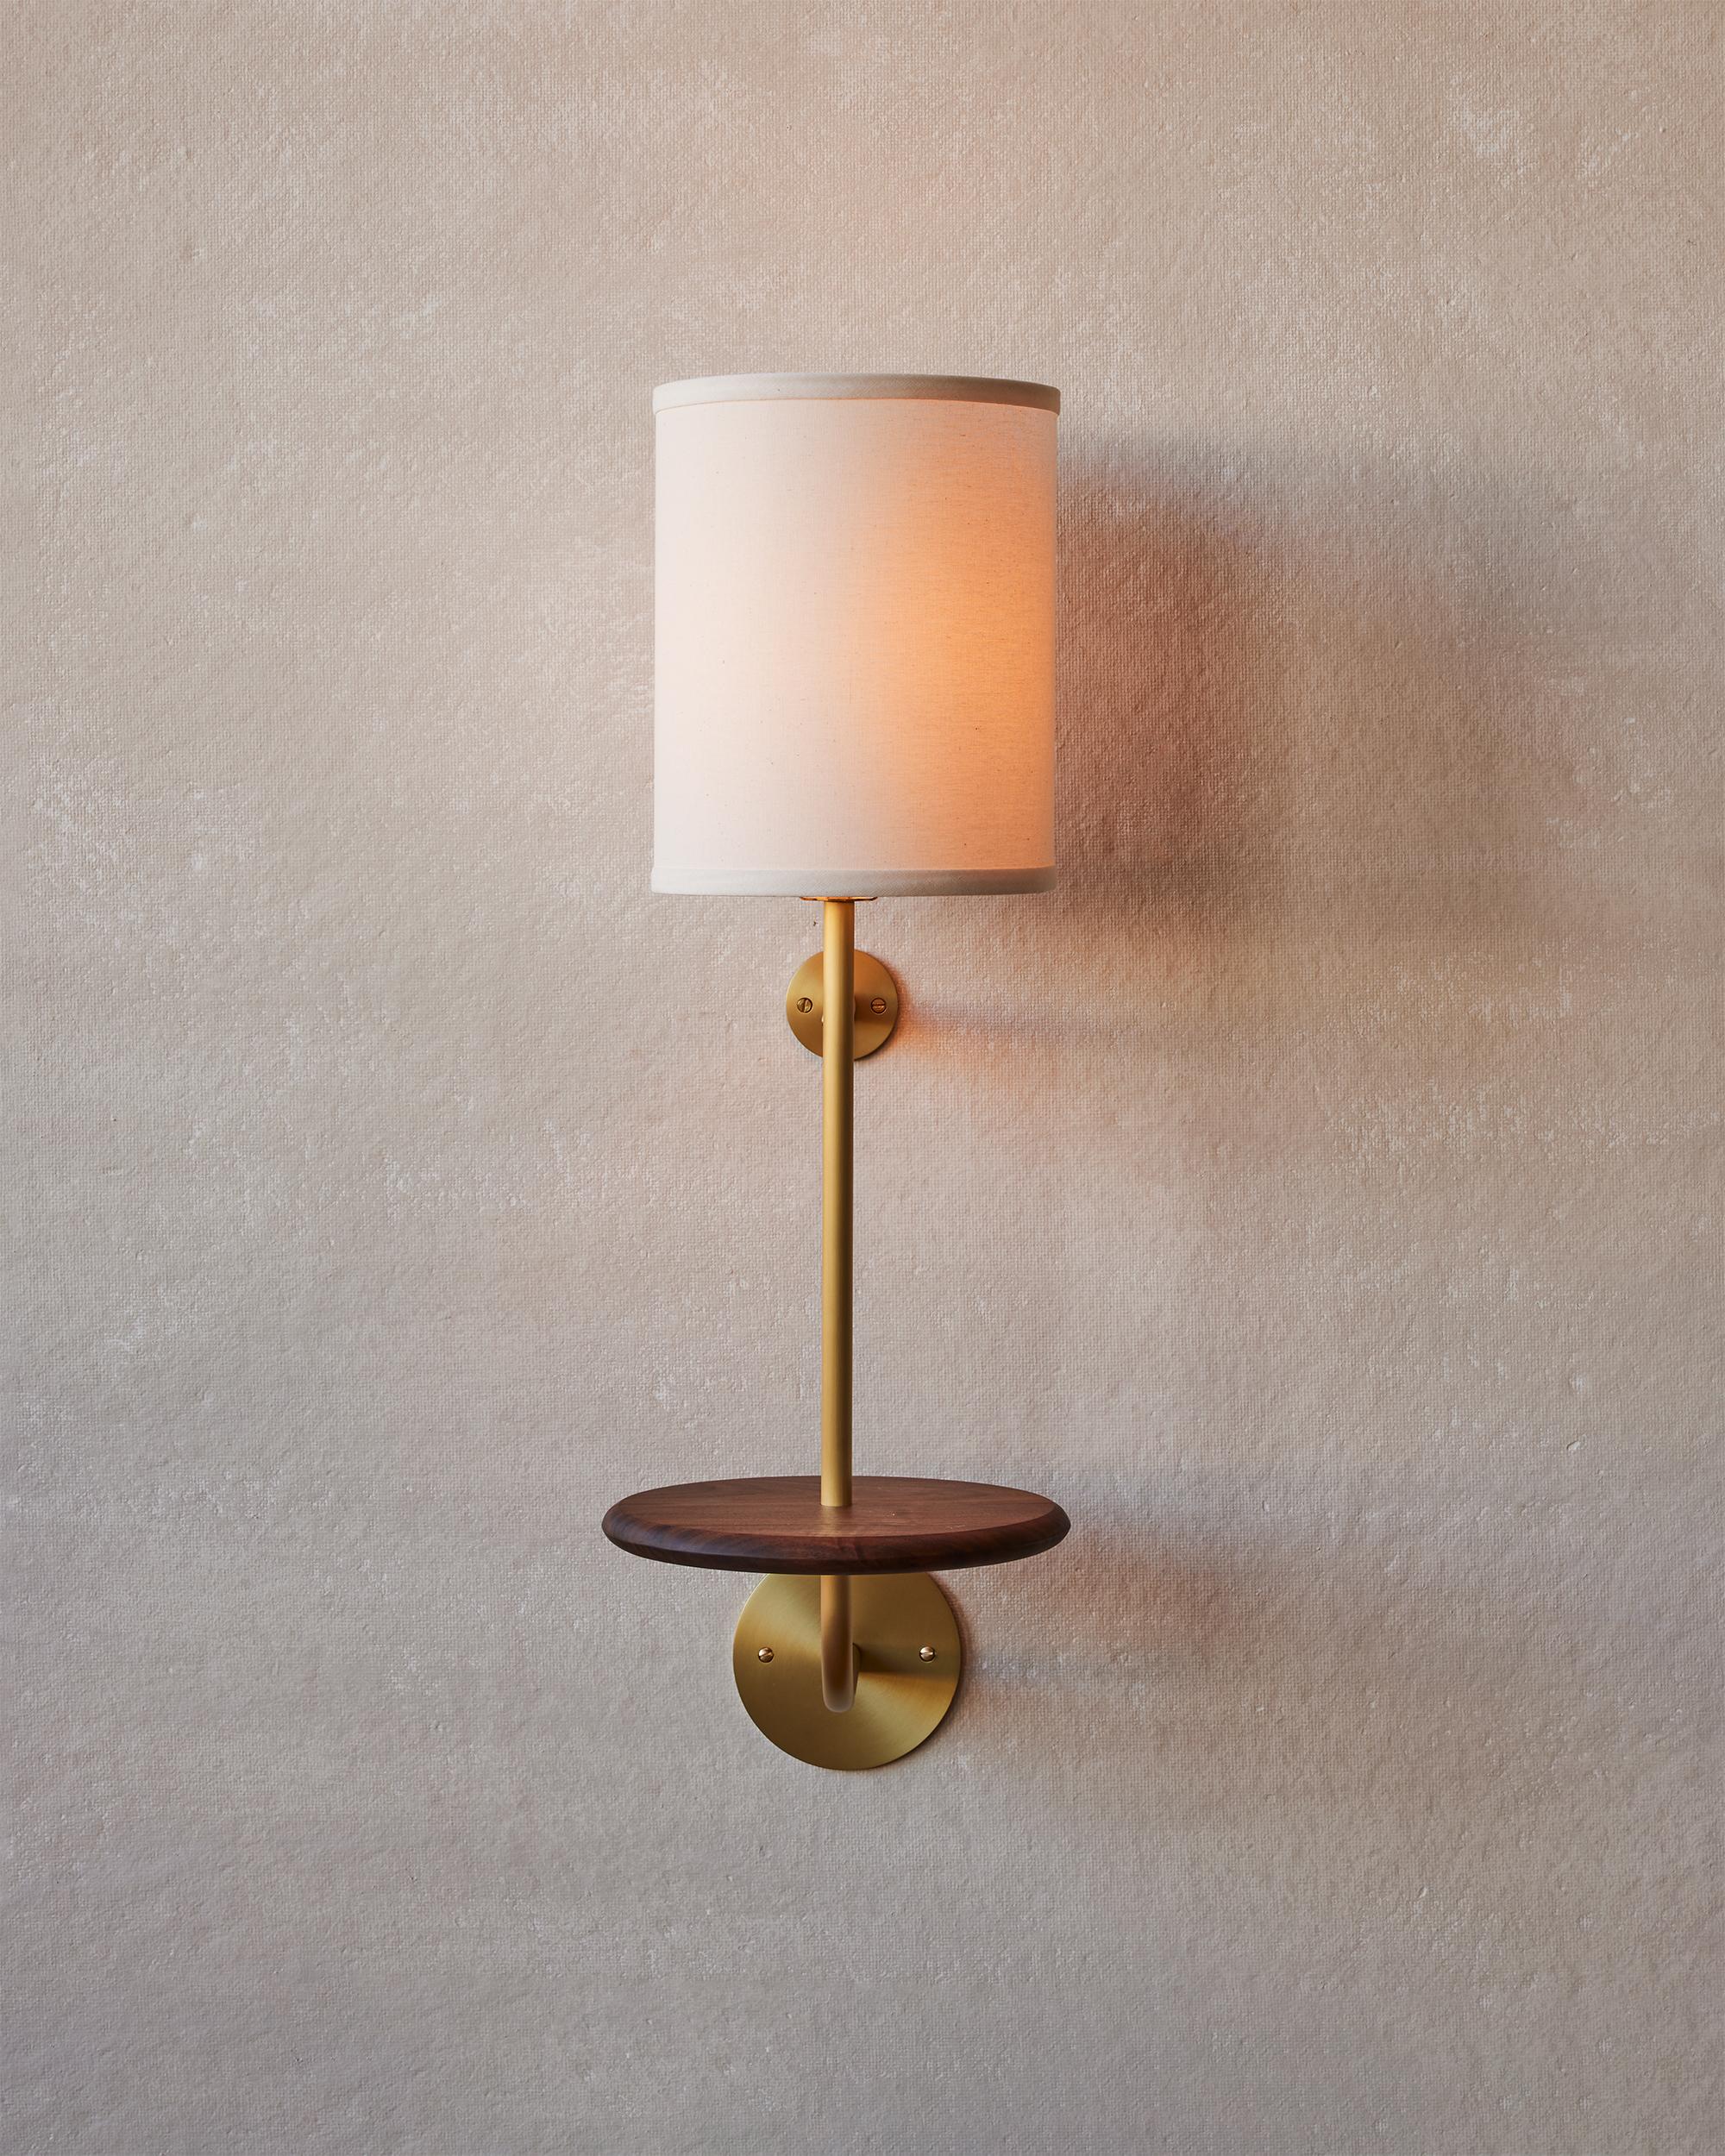 American Satin Brass Wall Sconce with Black Walnut Shelf Hardwired Ivory Linen Shade For Sale